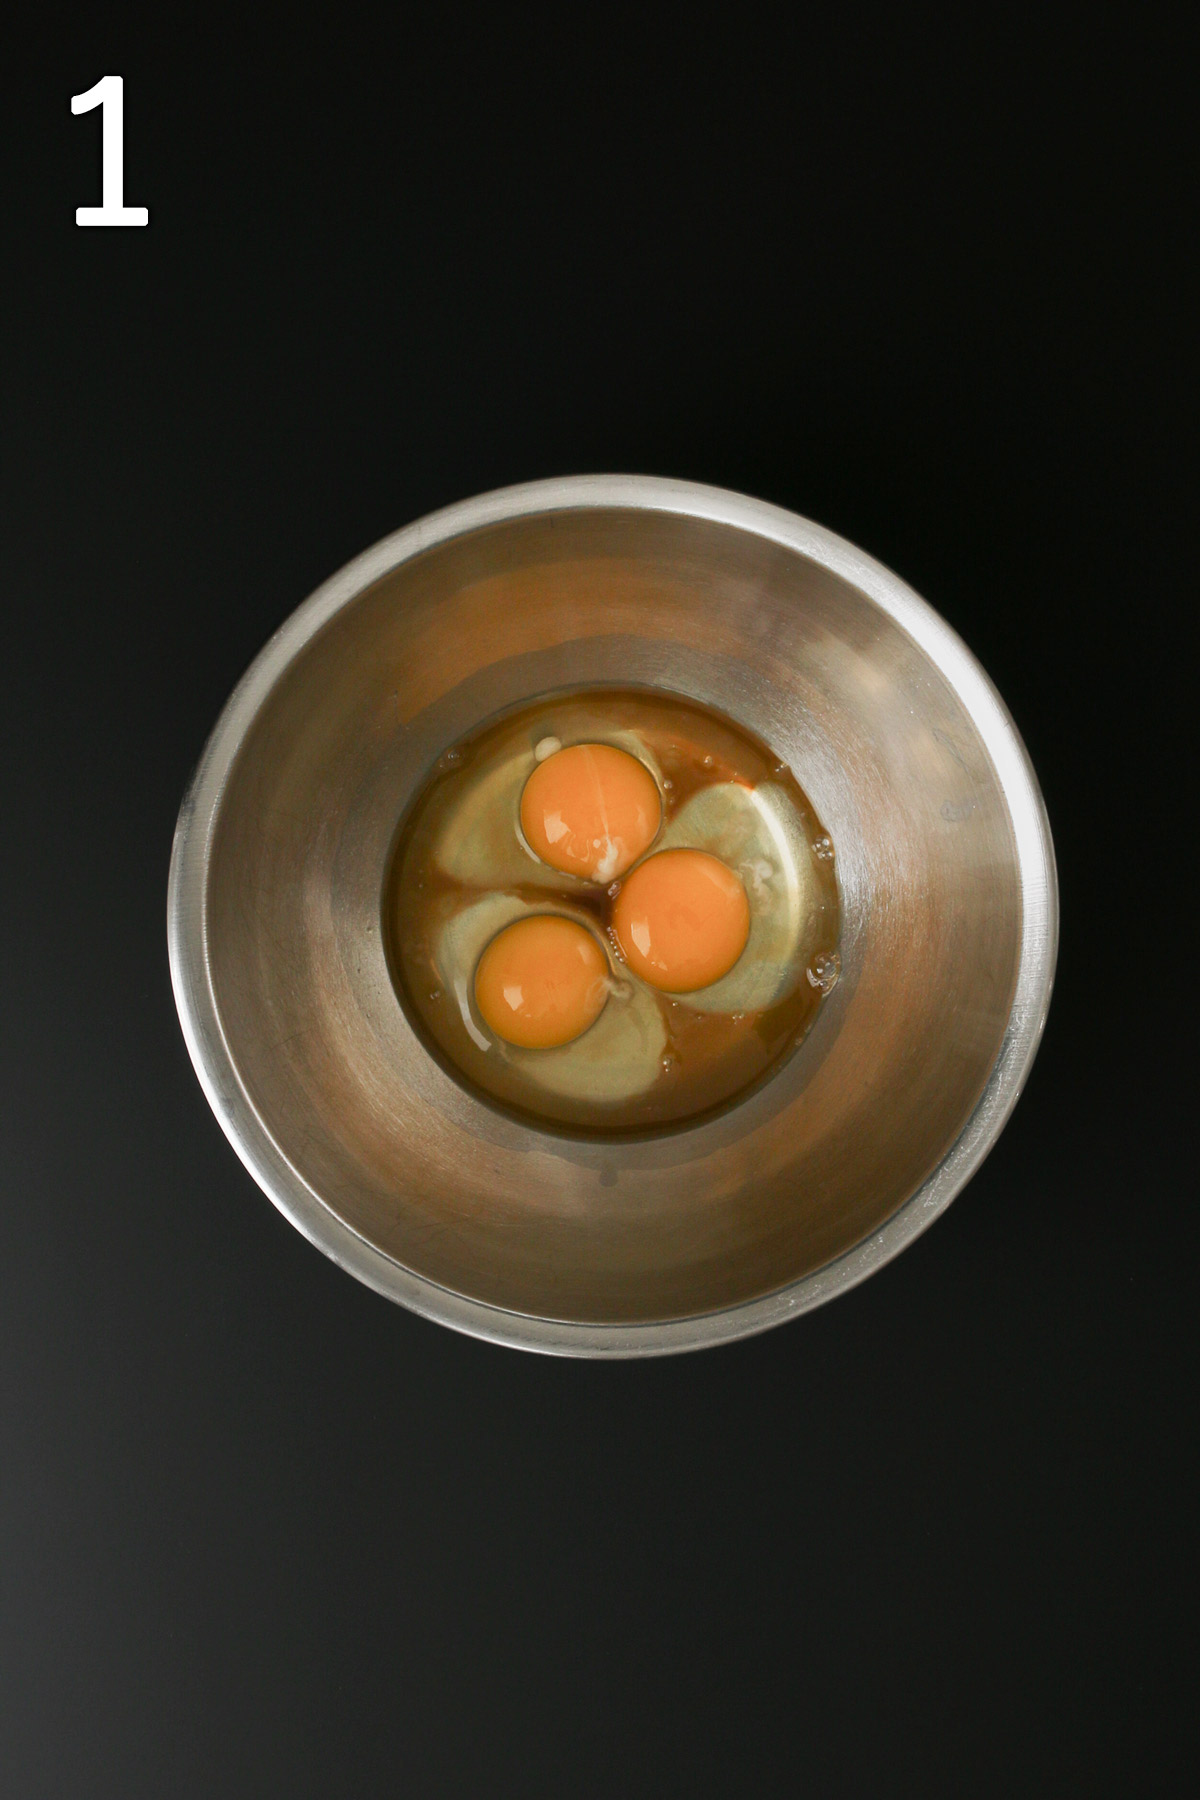 eggs and extracts in stainless steel mixing bowl.